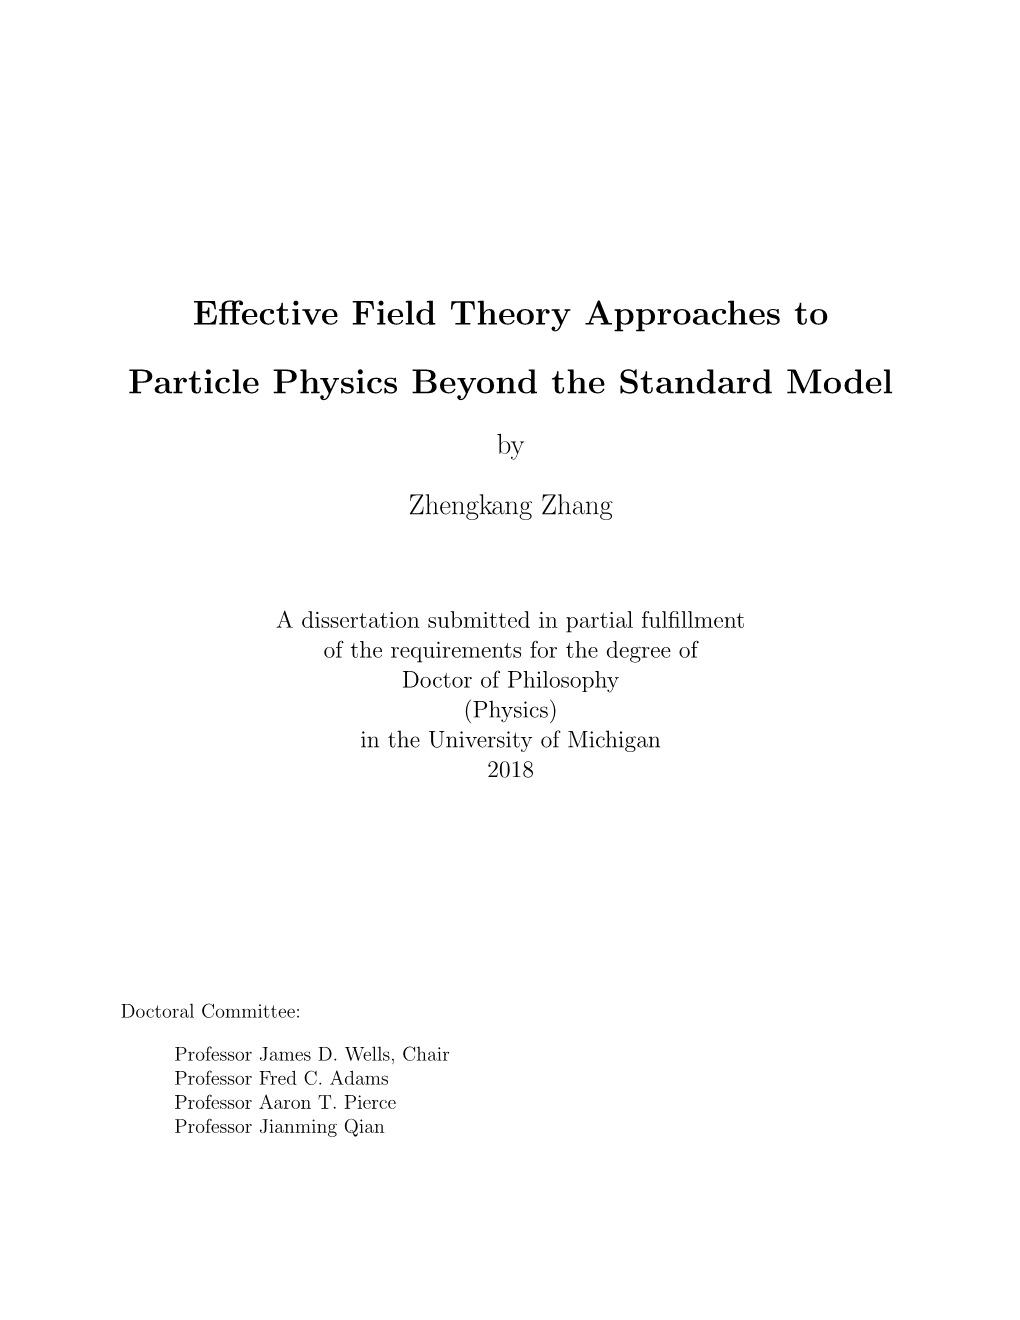 Effective Field Theory Approaches to Particle Physics Beyond The